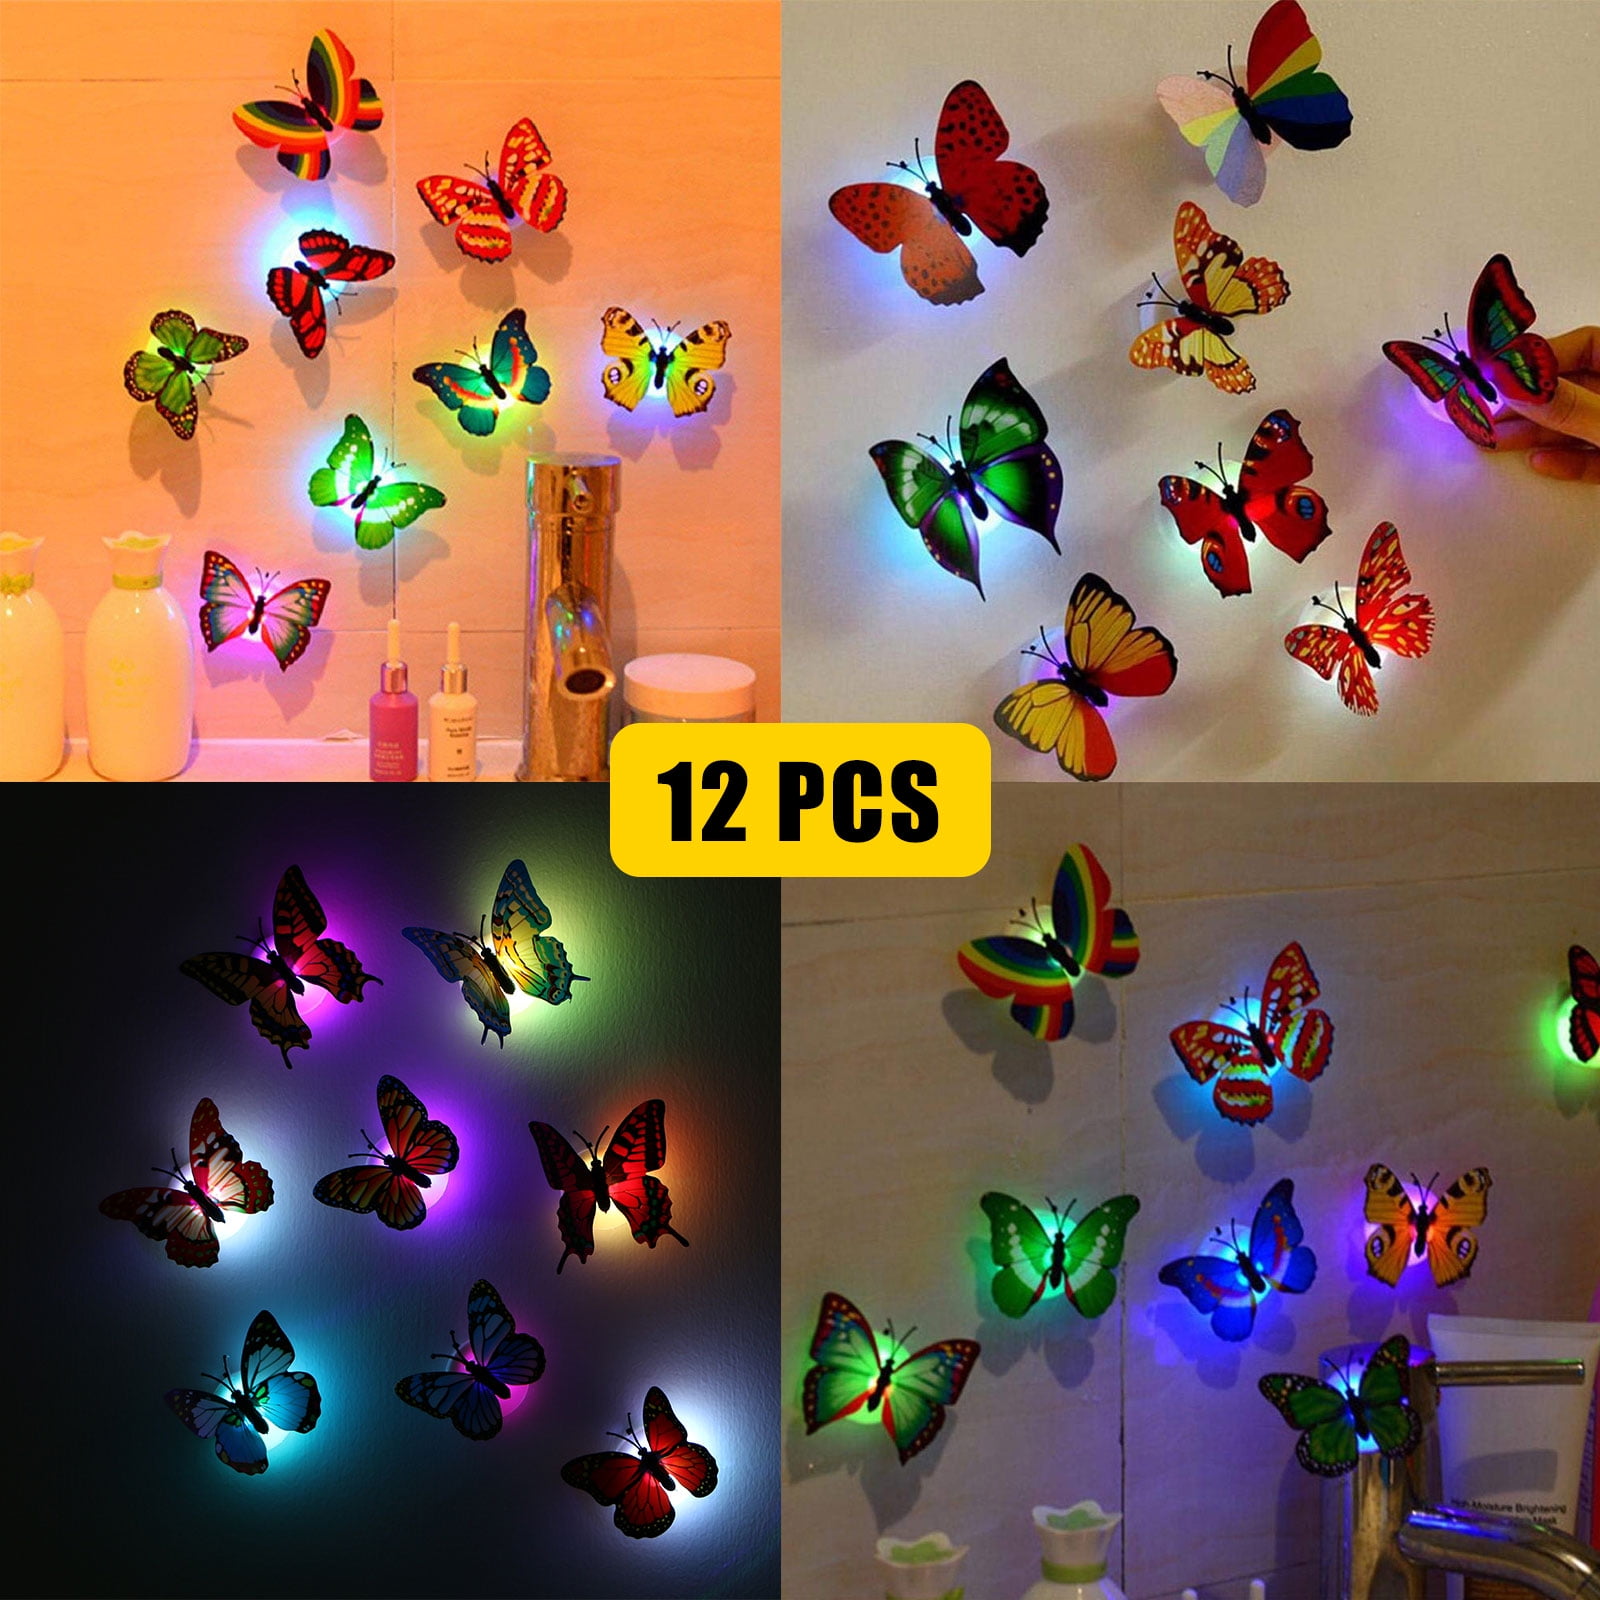 12pcs 3D Butterfly Wall Stickers Art Decals Home All Room Decorations Decor Kid